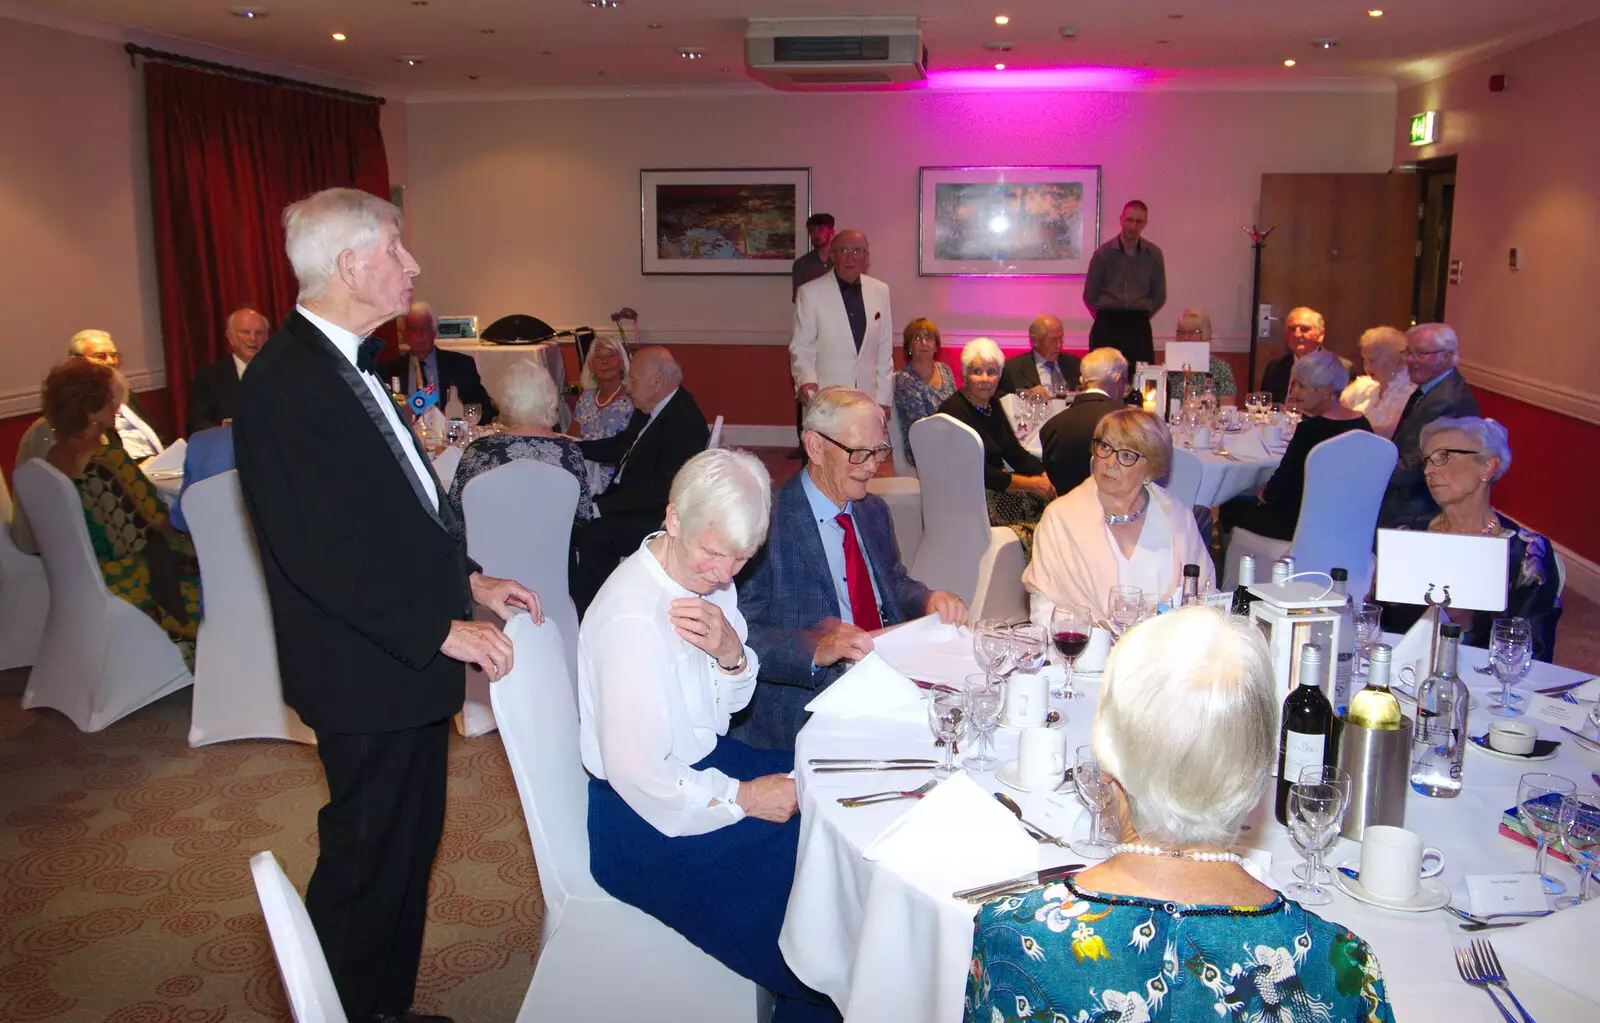 A pre-dinner introduction, from Kenilworth Castle and the 69th Entry Reunion Dinner, Stratford, Warwickshire - 14th September 2019